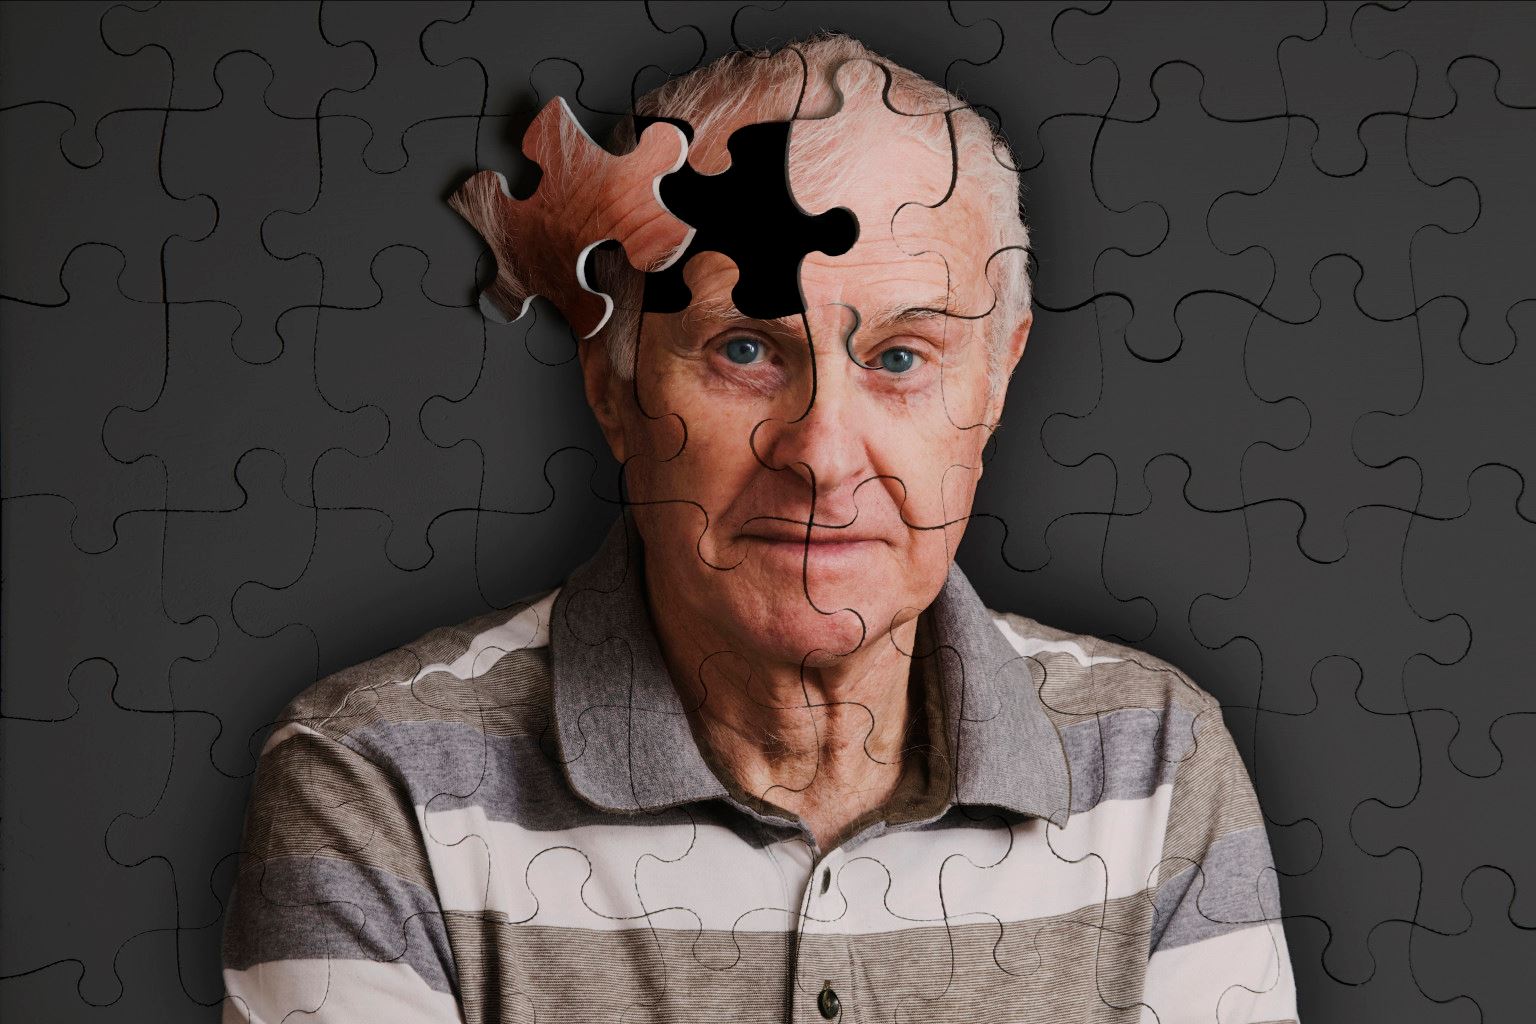 A new test does a better job of predicting which cognitively normal older adults will go on to develop Alzheimer's dementia than testing only for the well-known genetic variant APOE E4. [ajcity.net]